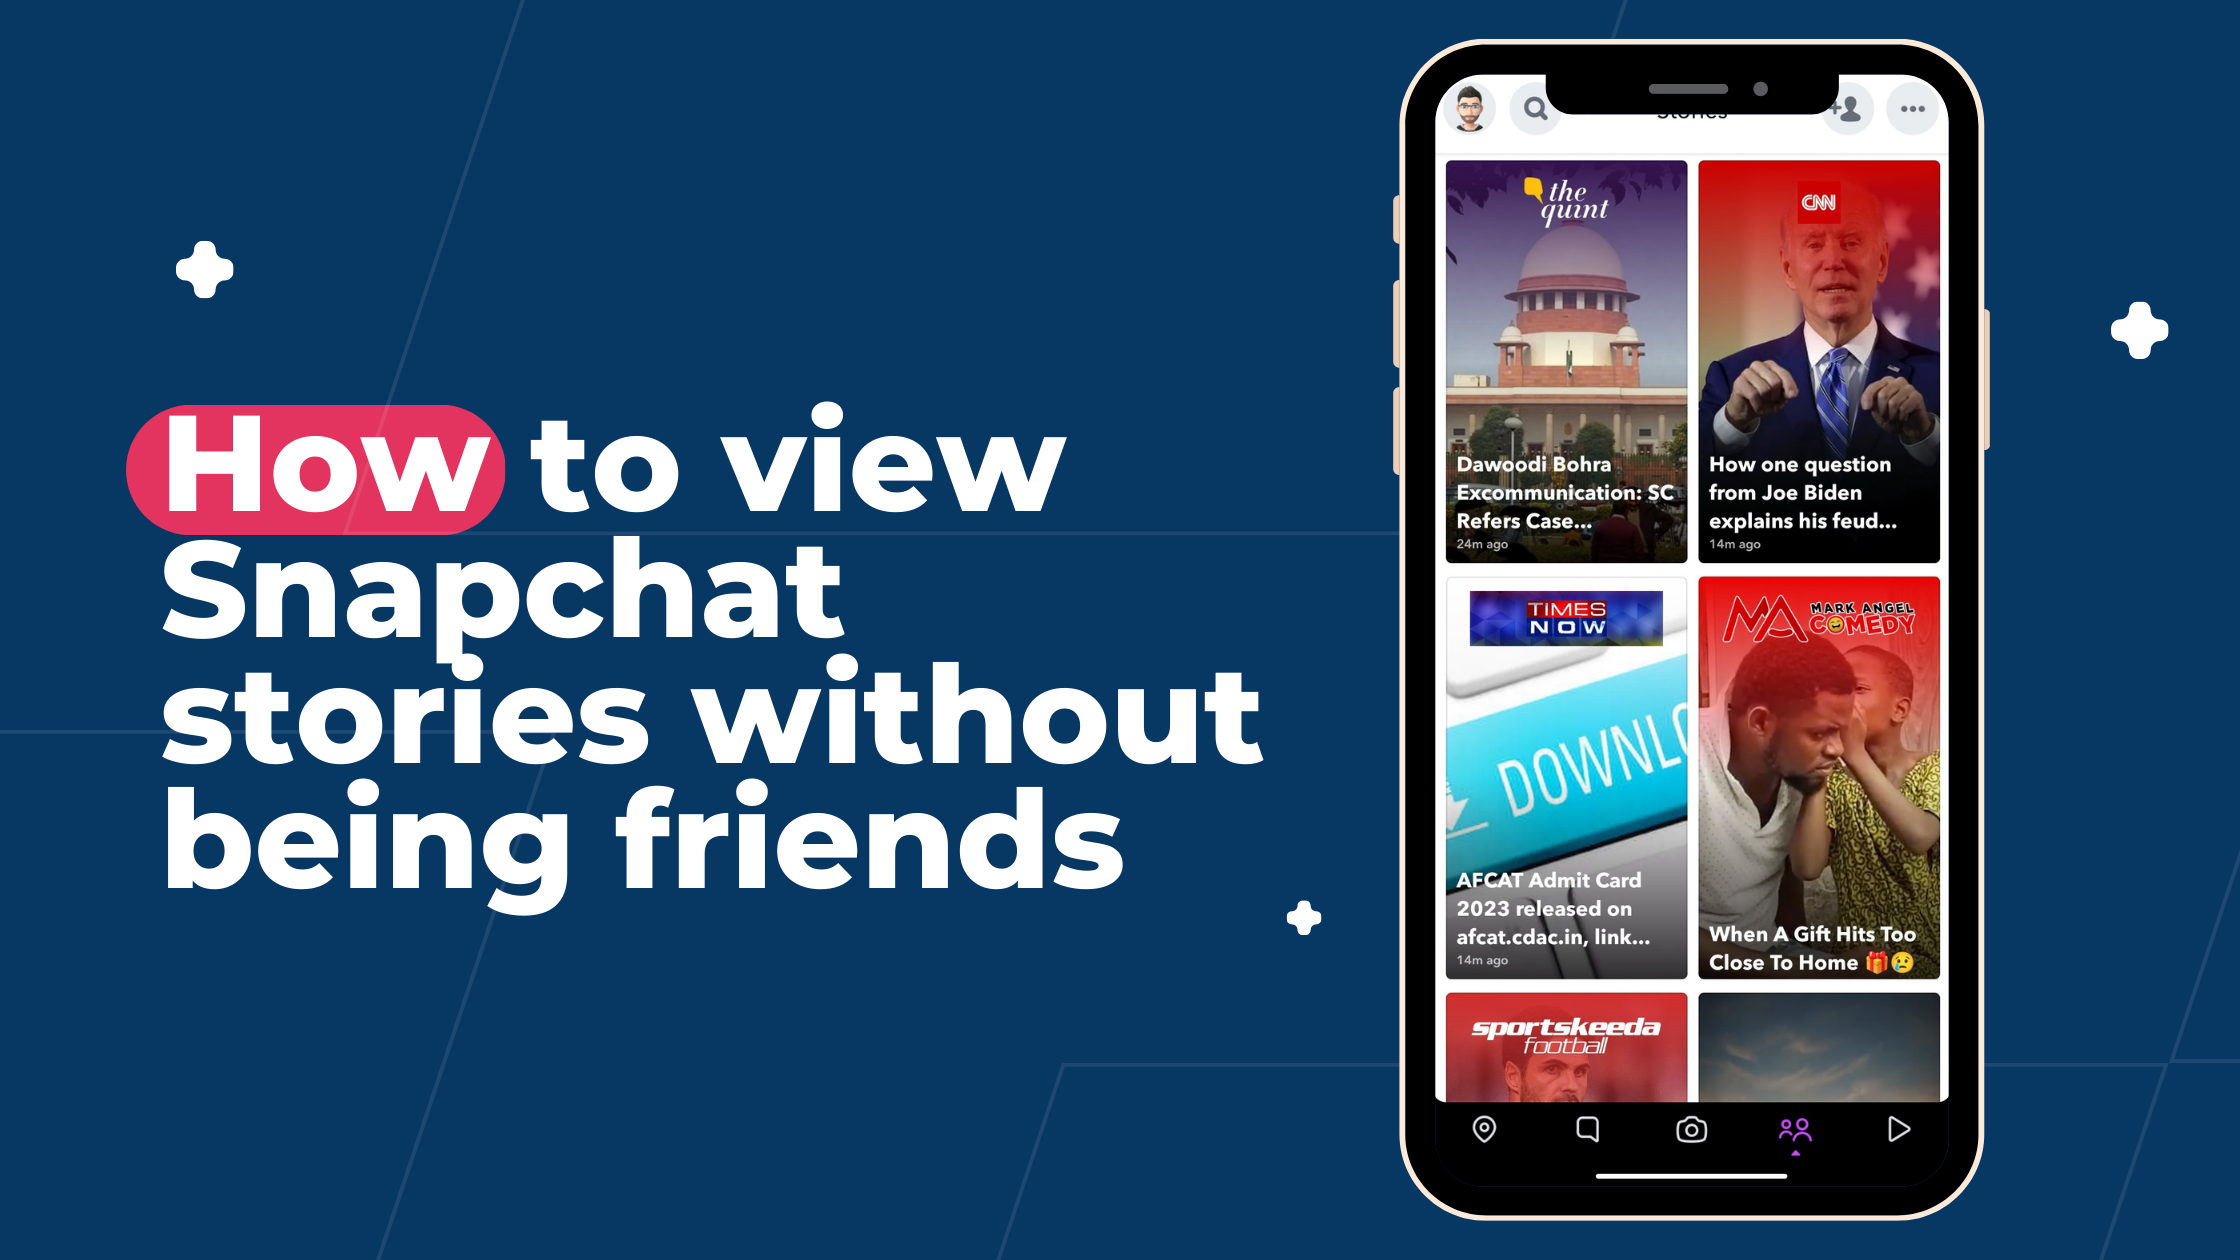 Remote.tools shares an ultimate guide on how to view snapchat stories without being friends